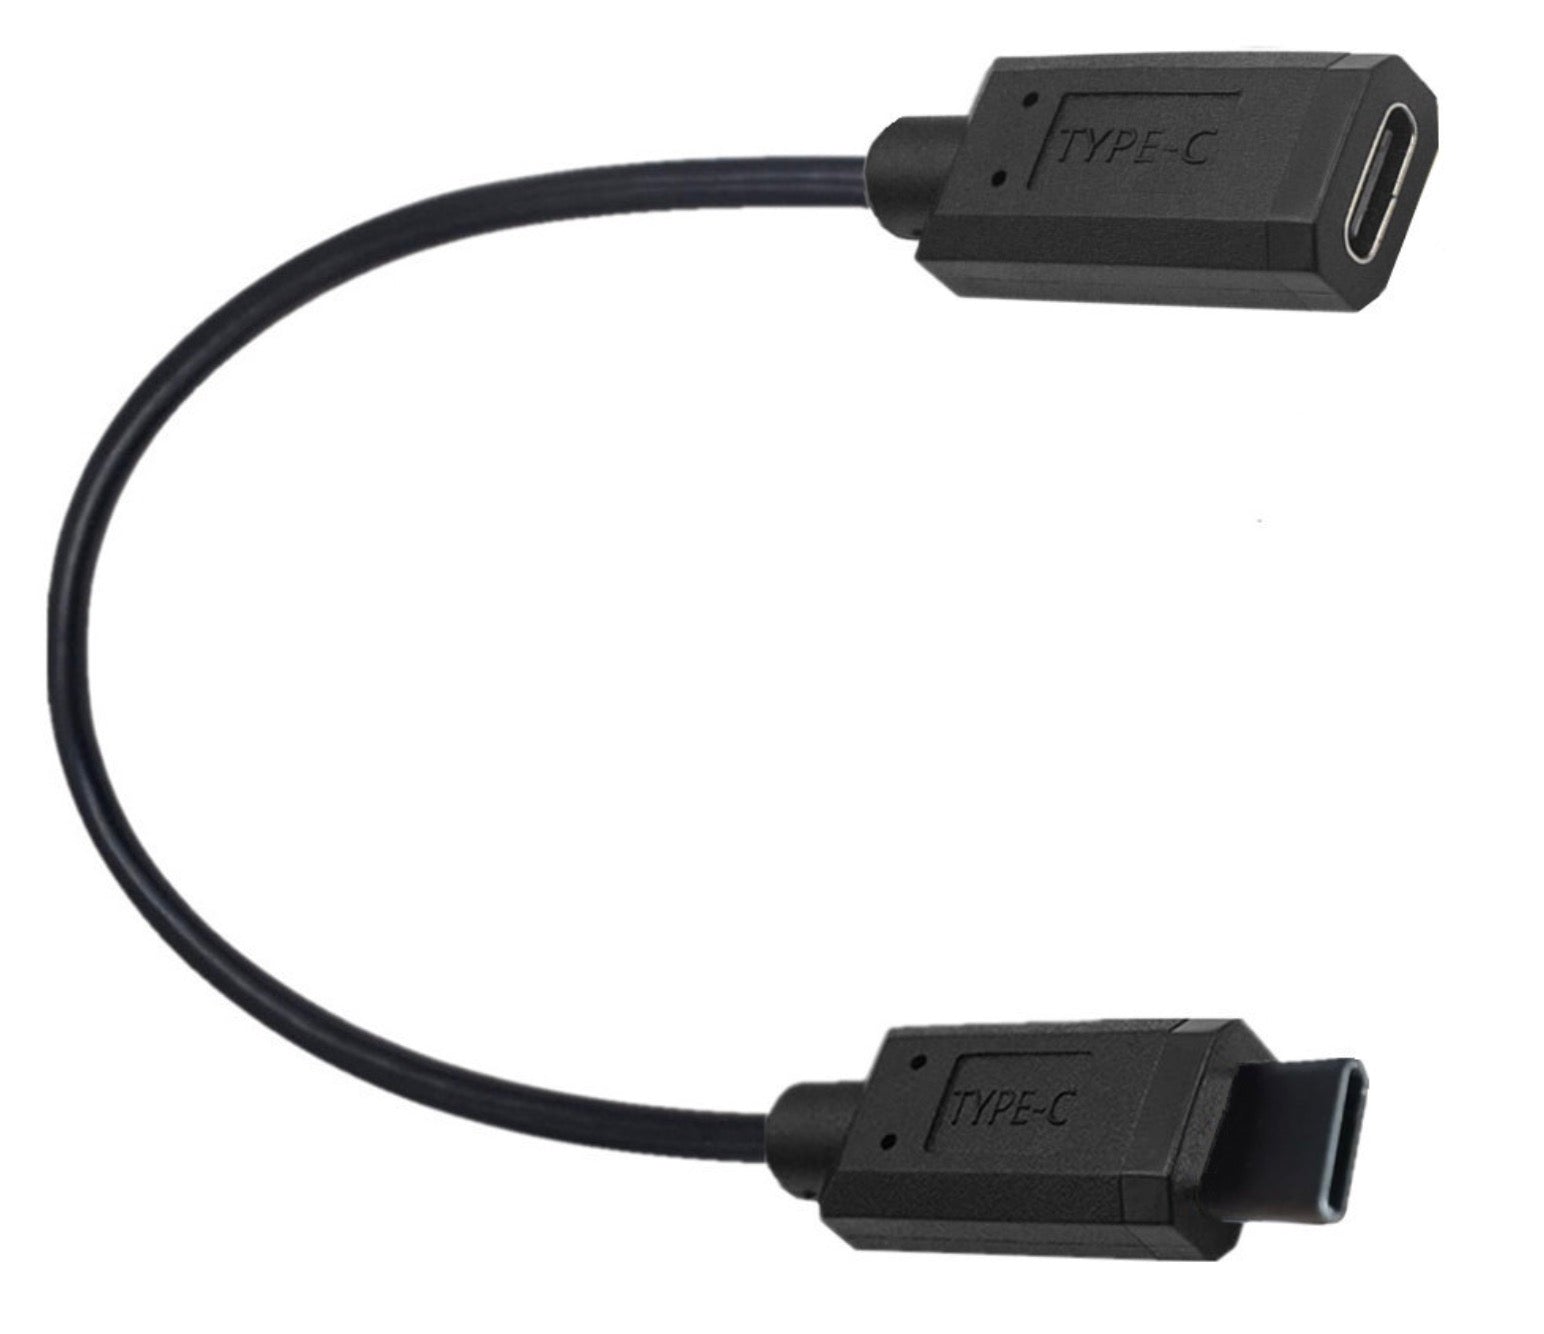 10Gbps USB-C Male to Female Test Cable With Anti-Scratch Connector